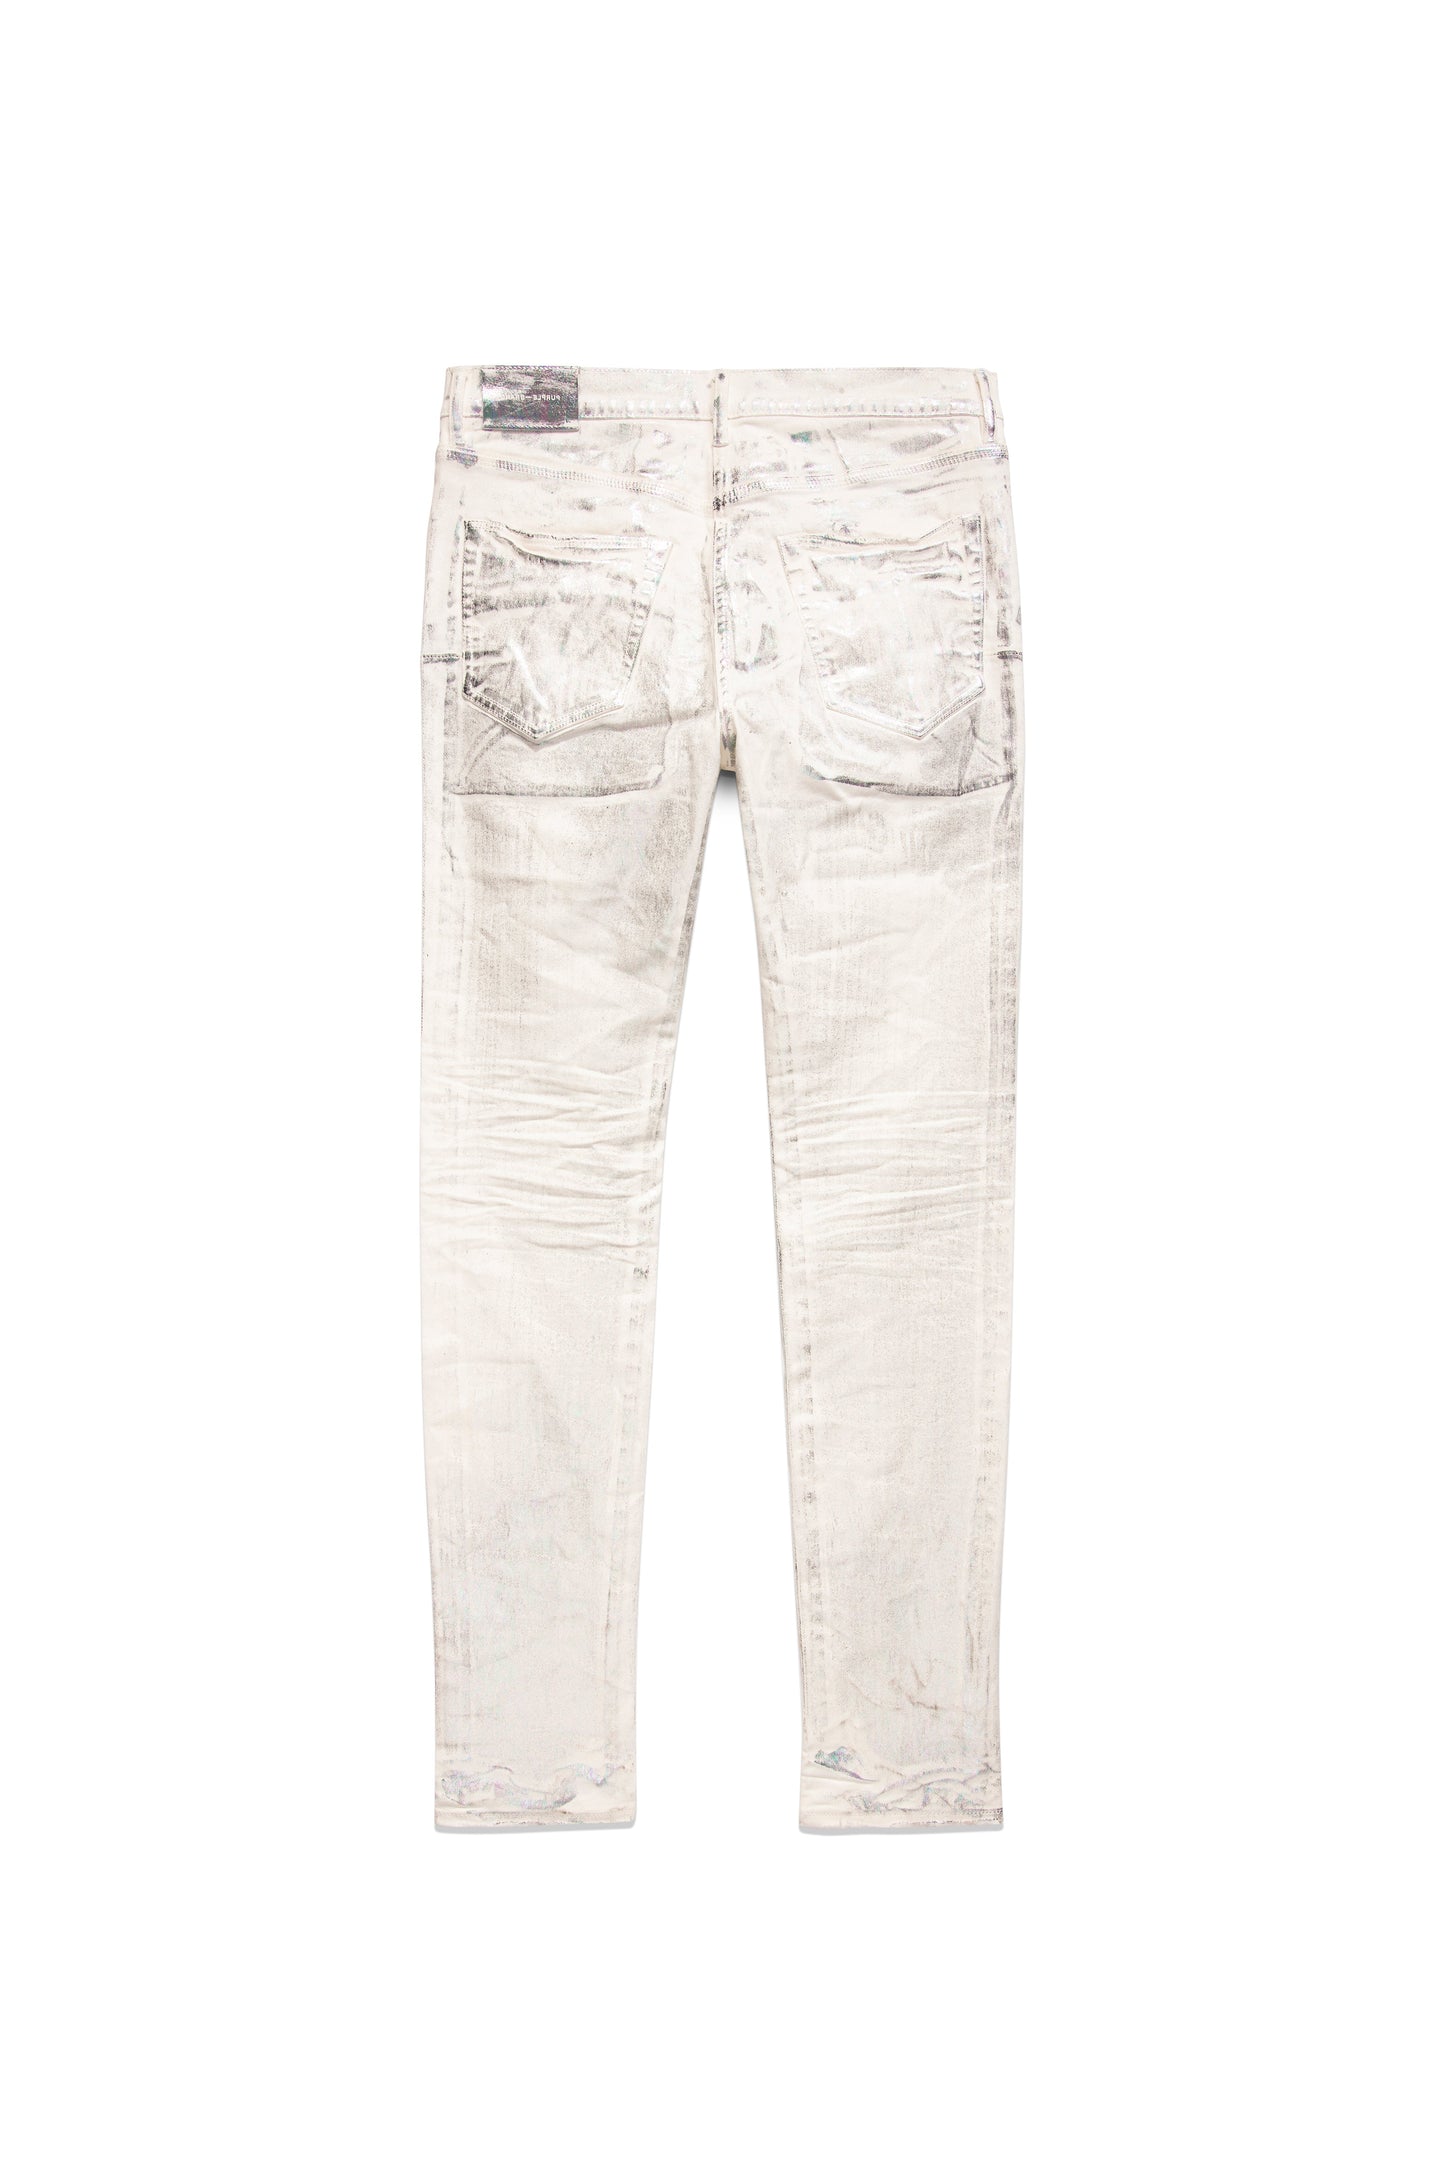 P001 LOW RISE SKINNY JEAN - White X Ray With Wave Foil